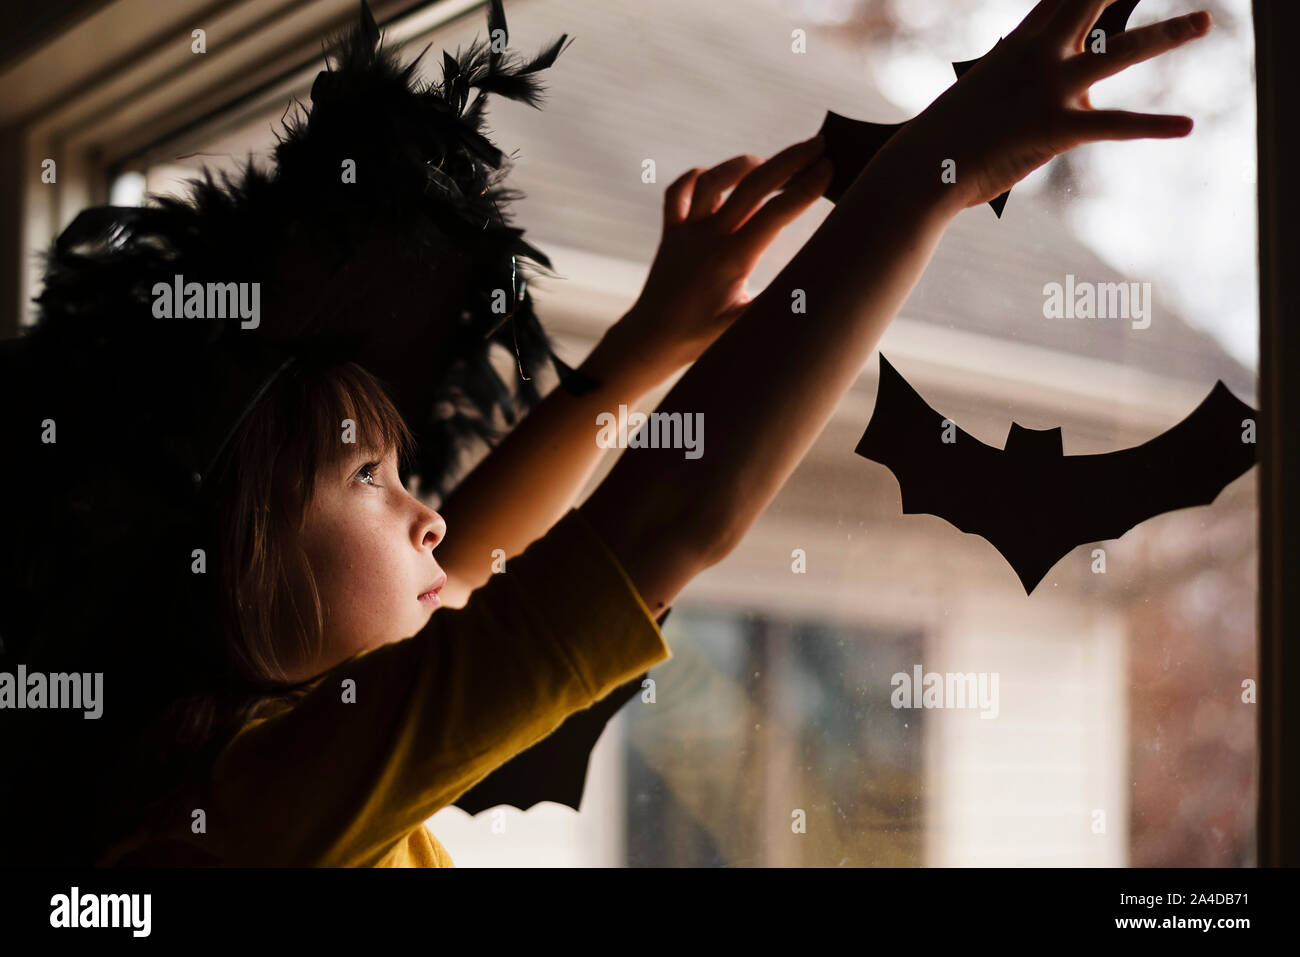 Girl in a witch's hat putting up Halloween decorations Stock Photo - Alamy